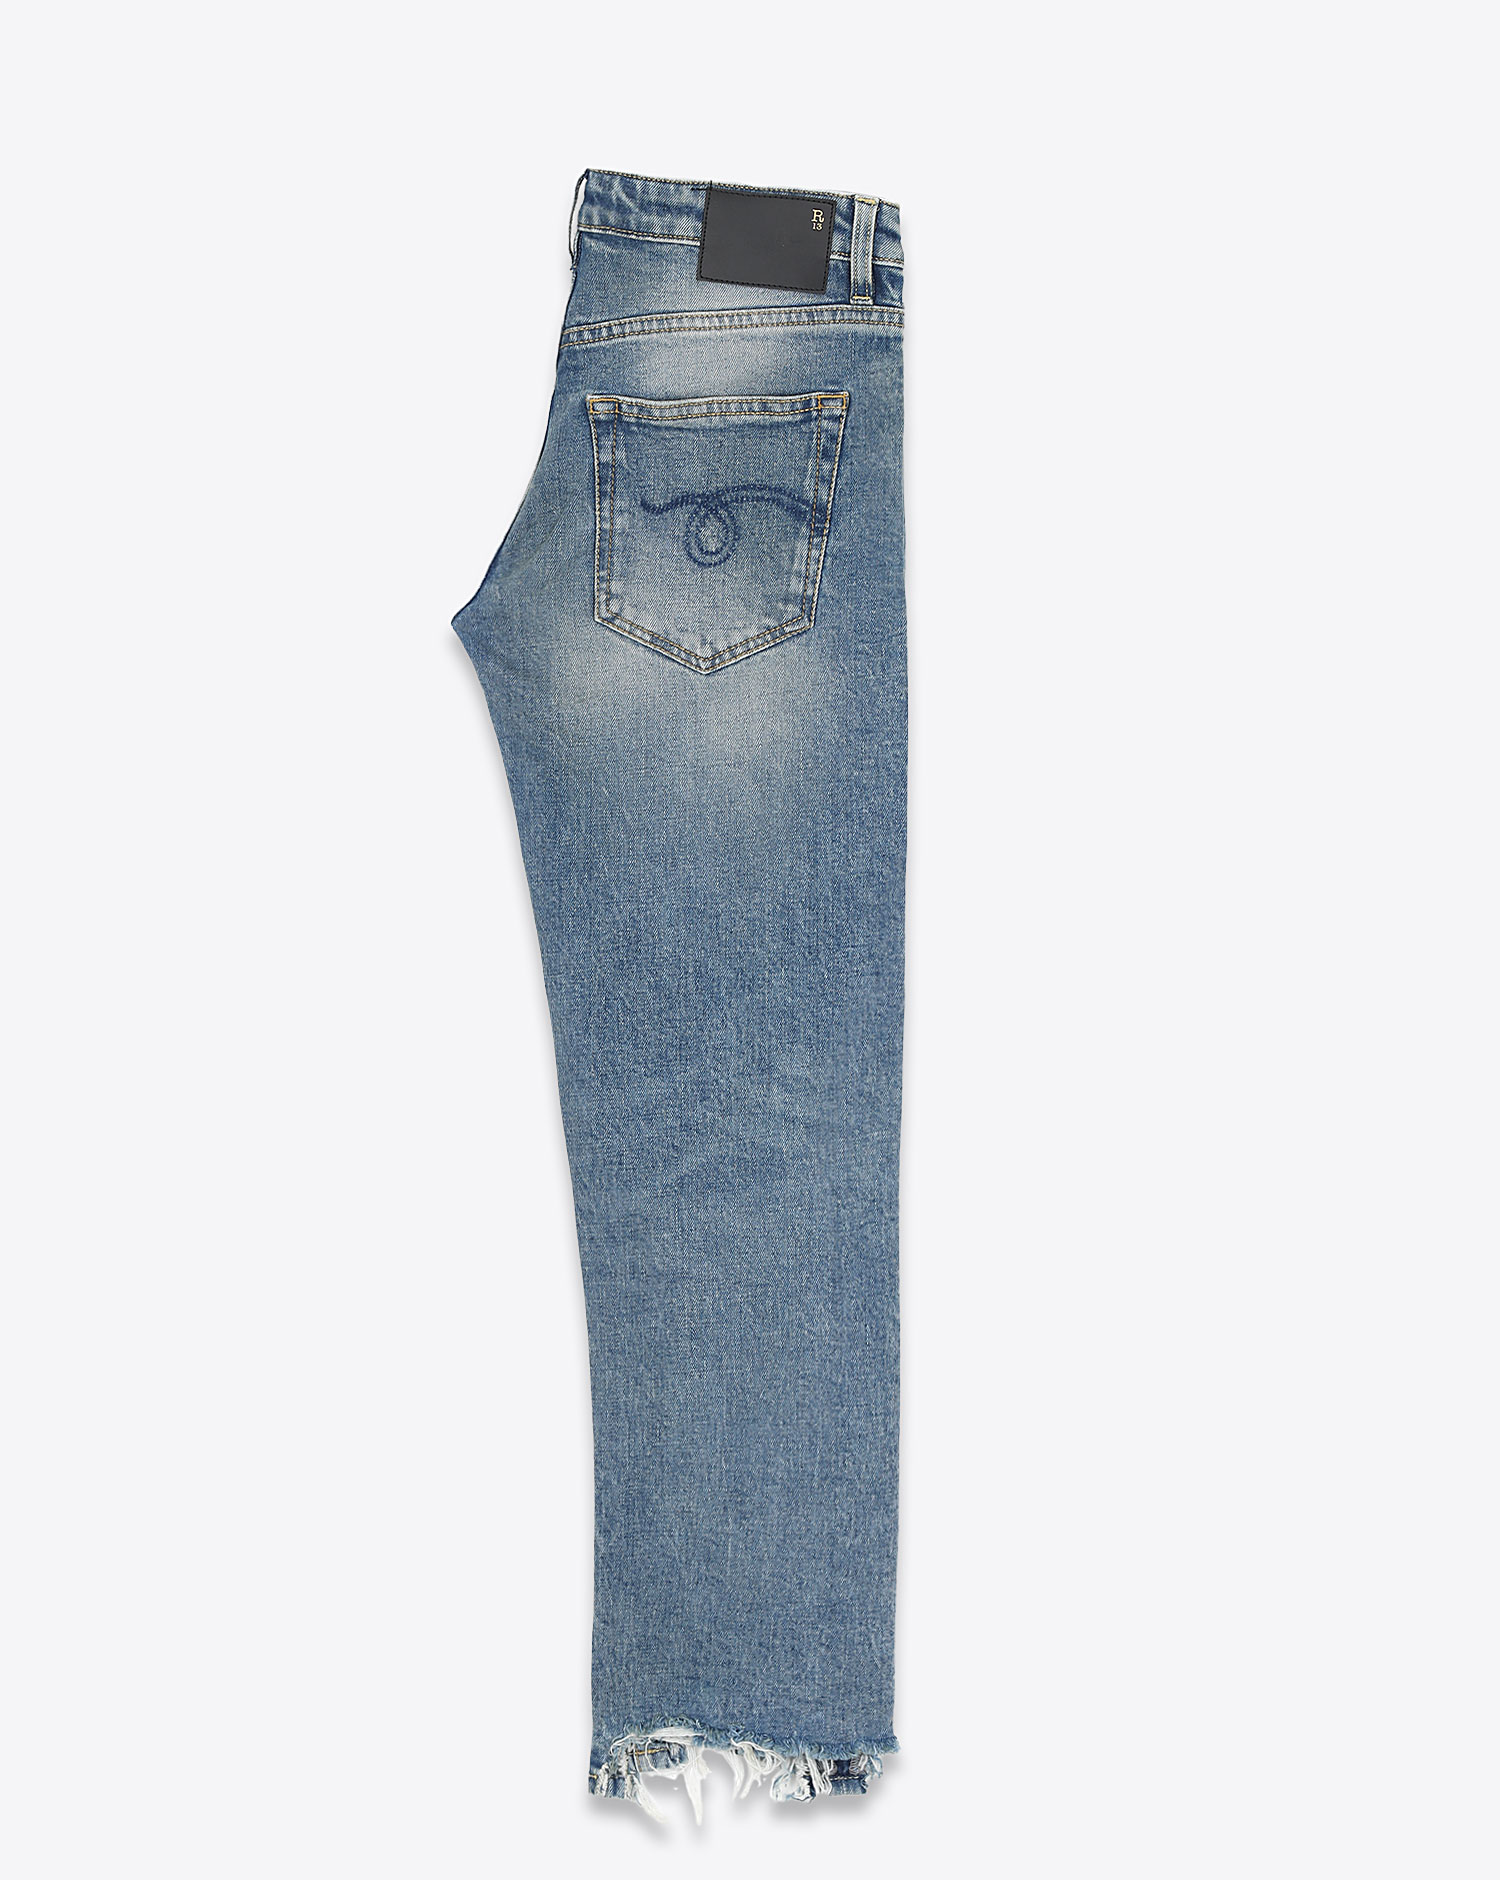 Jeans R13 Denim Jeans Boy Straight With Rip 